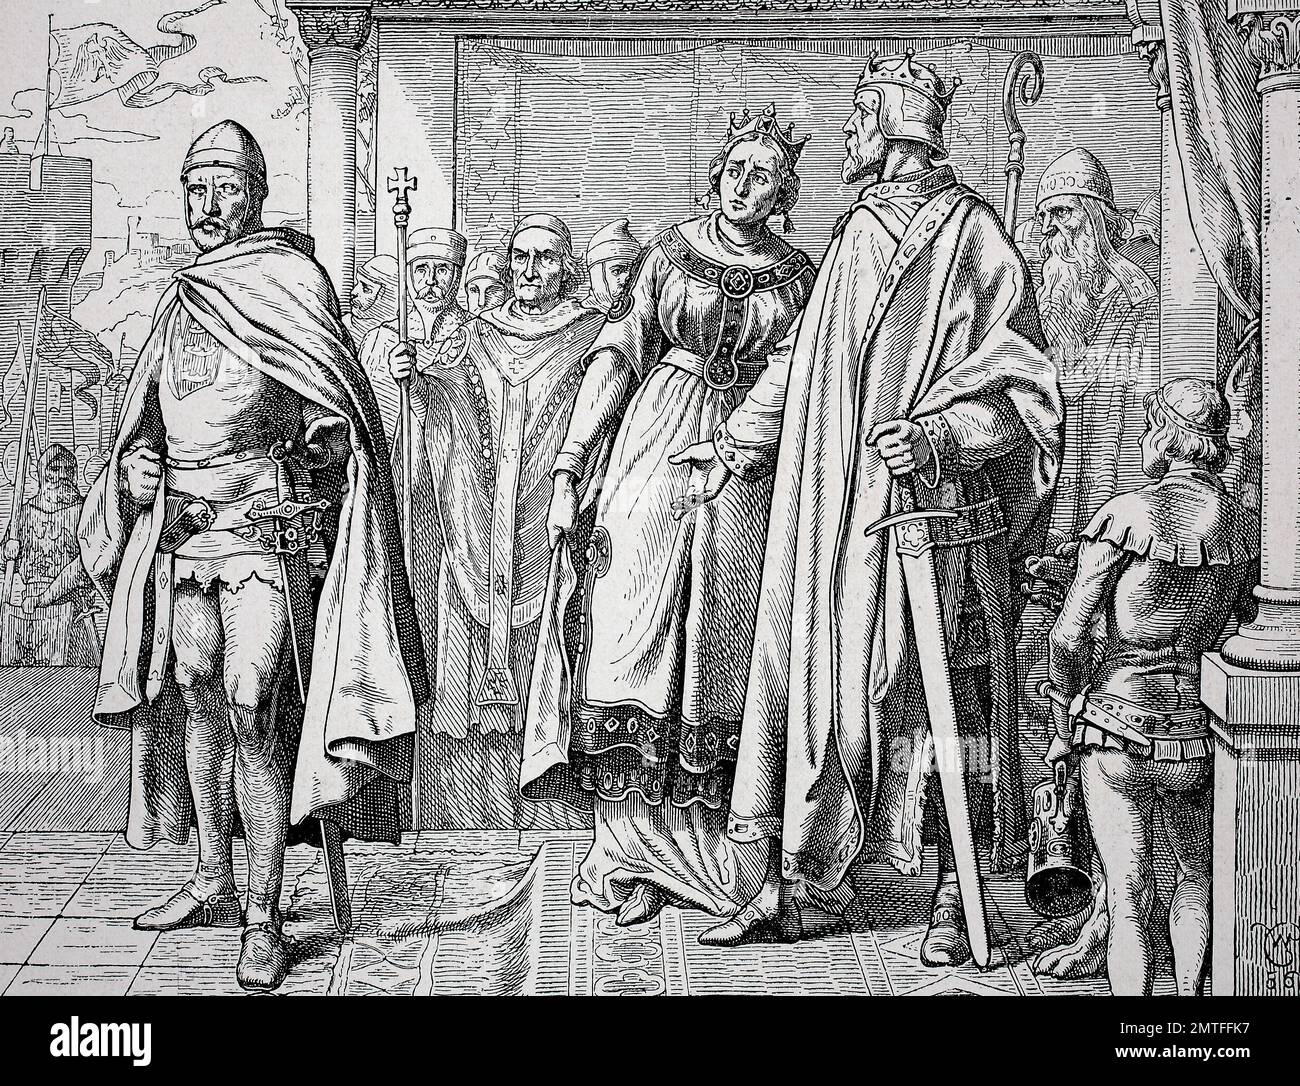 Ernest II, died 17 August 1030, Duke of Swabia and Conrad II, 990 - 4 June 1039, also known as Conrad the Elder and Conrad the Salic, was Emperor of the Holy Roman Empire, at Ingelheim, Germany, historical illustration Stock Photo